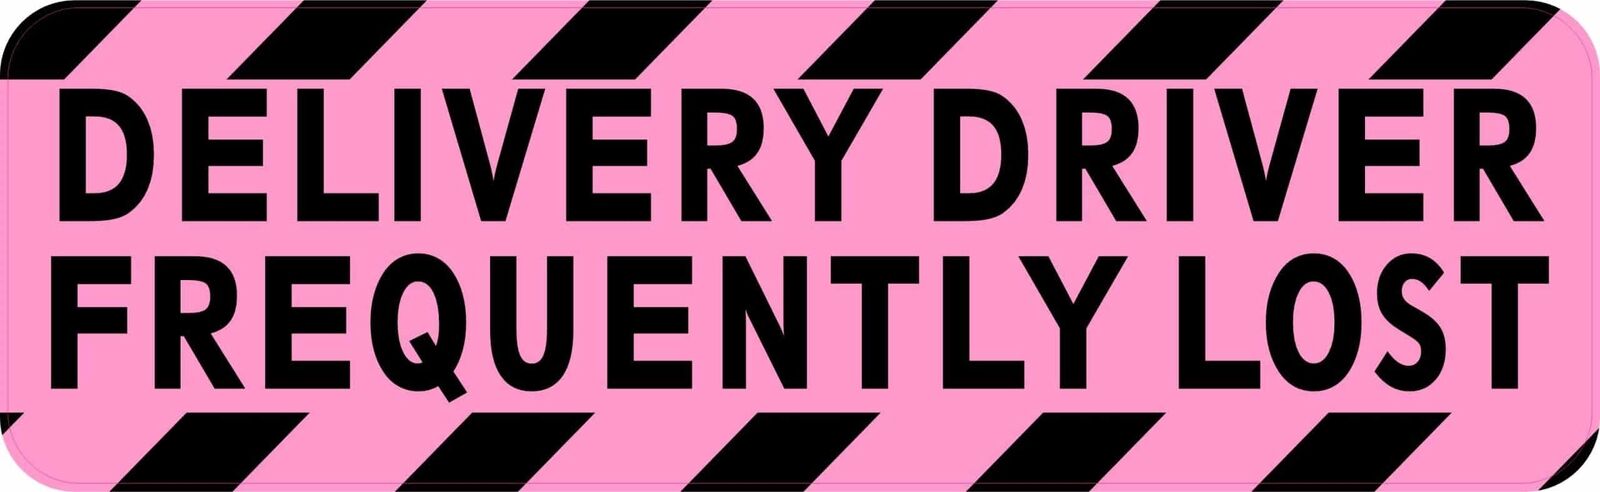 StickerTalk Delivery Driver Frequently Lost Vinyl Sticker, 10 inches x 3 inches